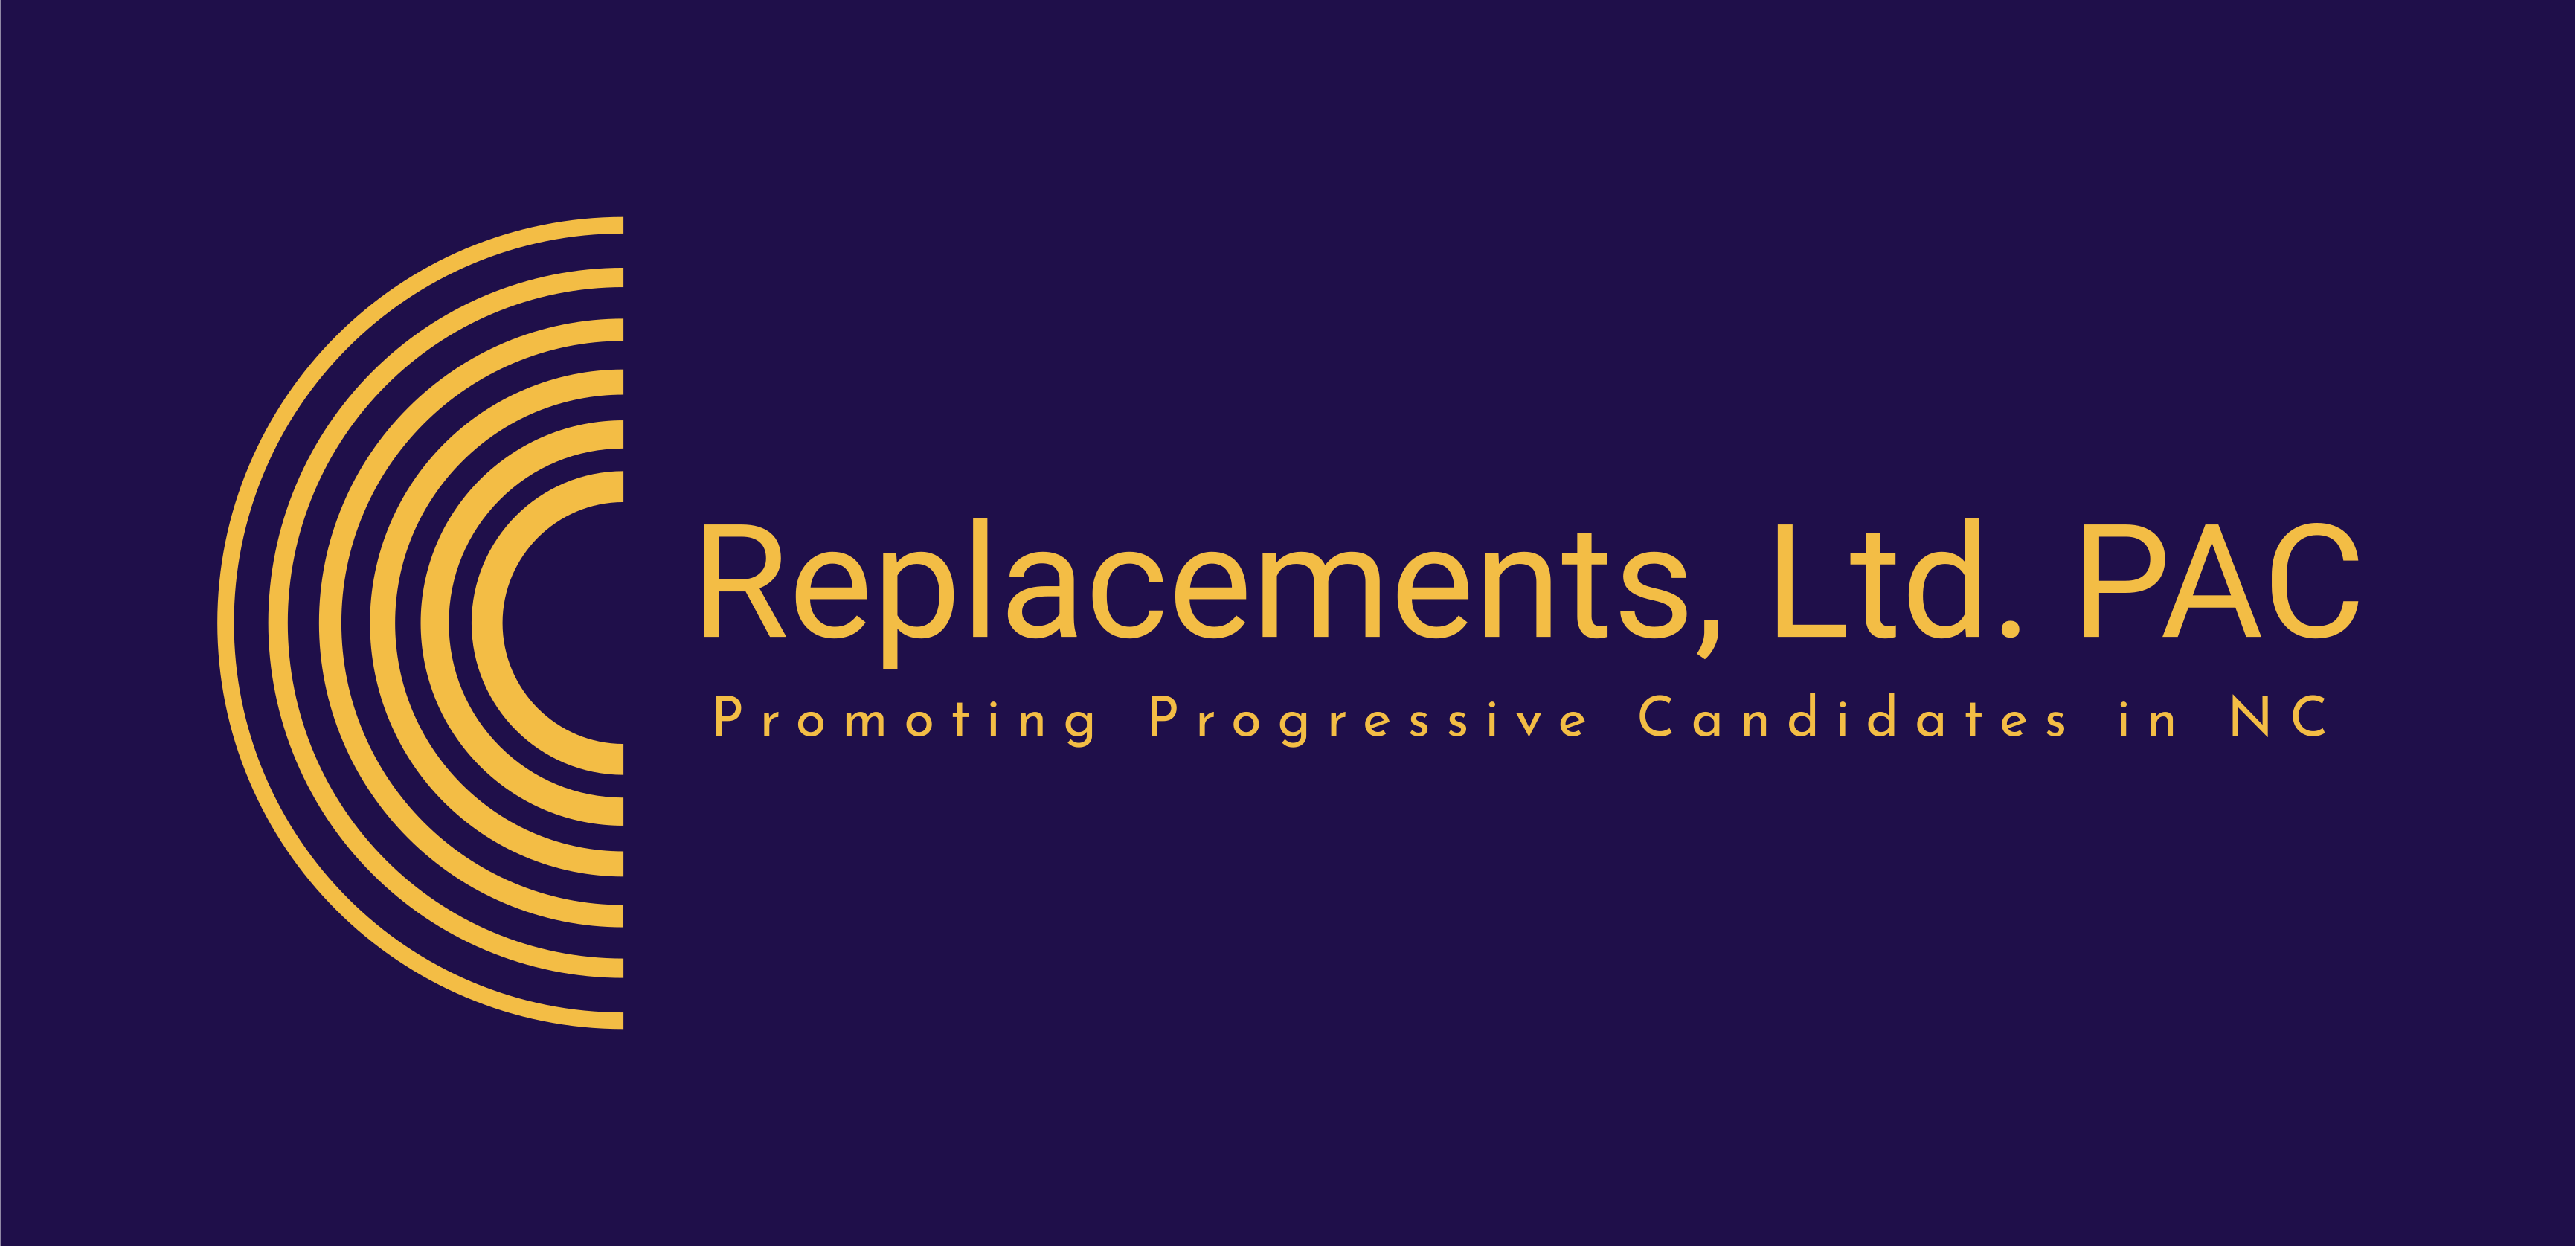 Replacements, Ltd. PAC